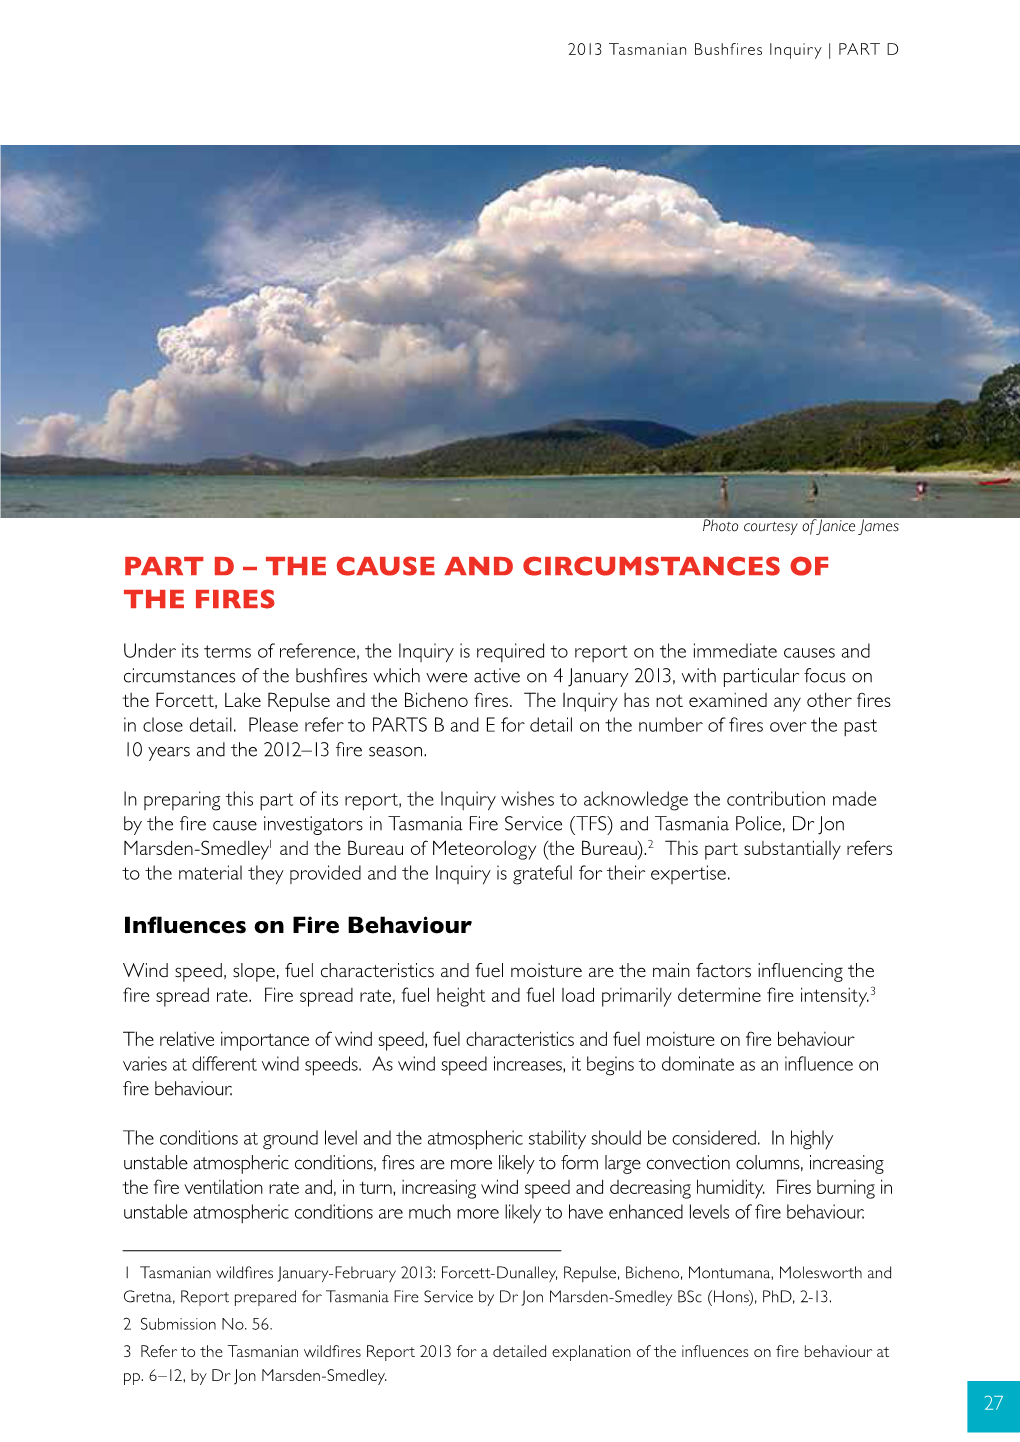 Part D – the Cause and Circumstances of the Fires